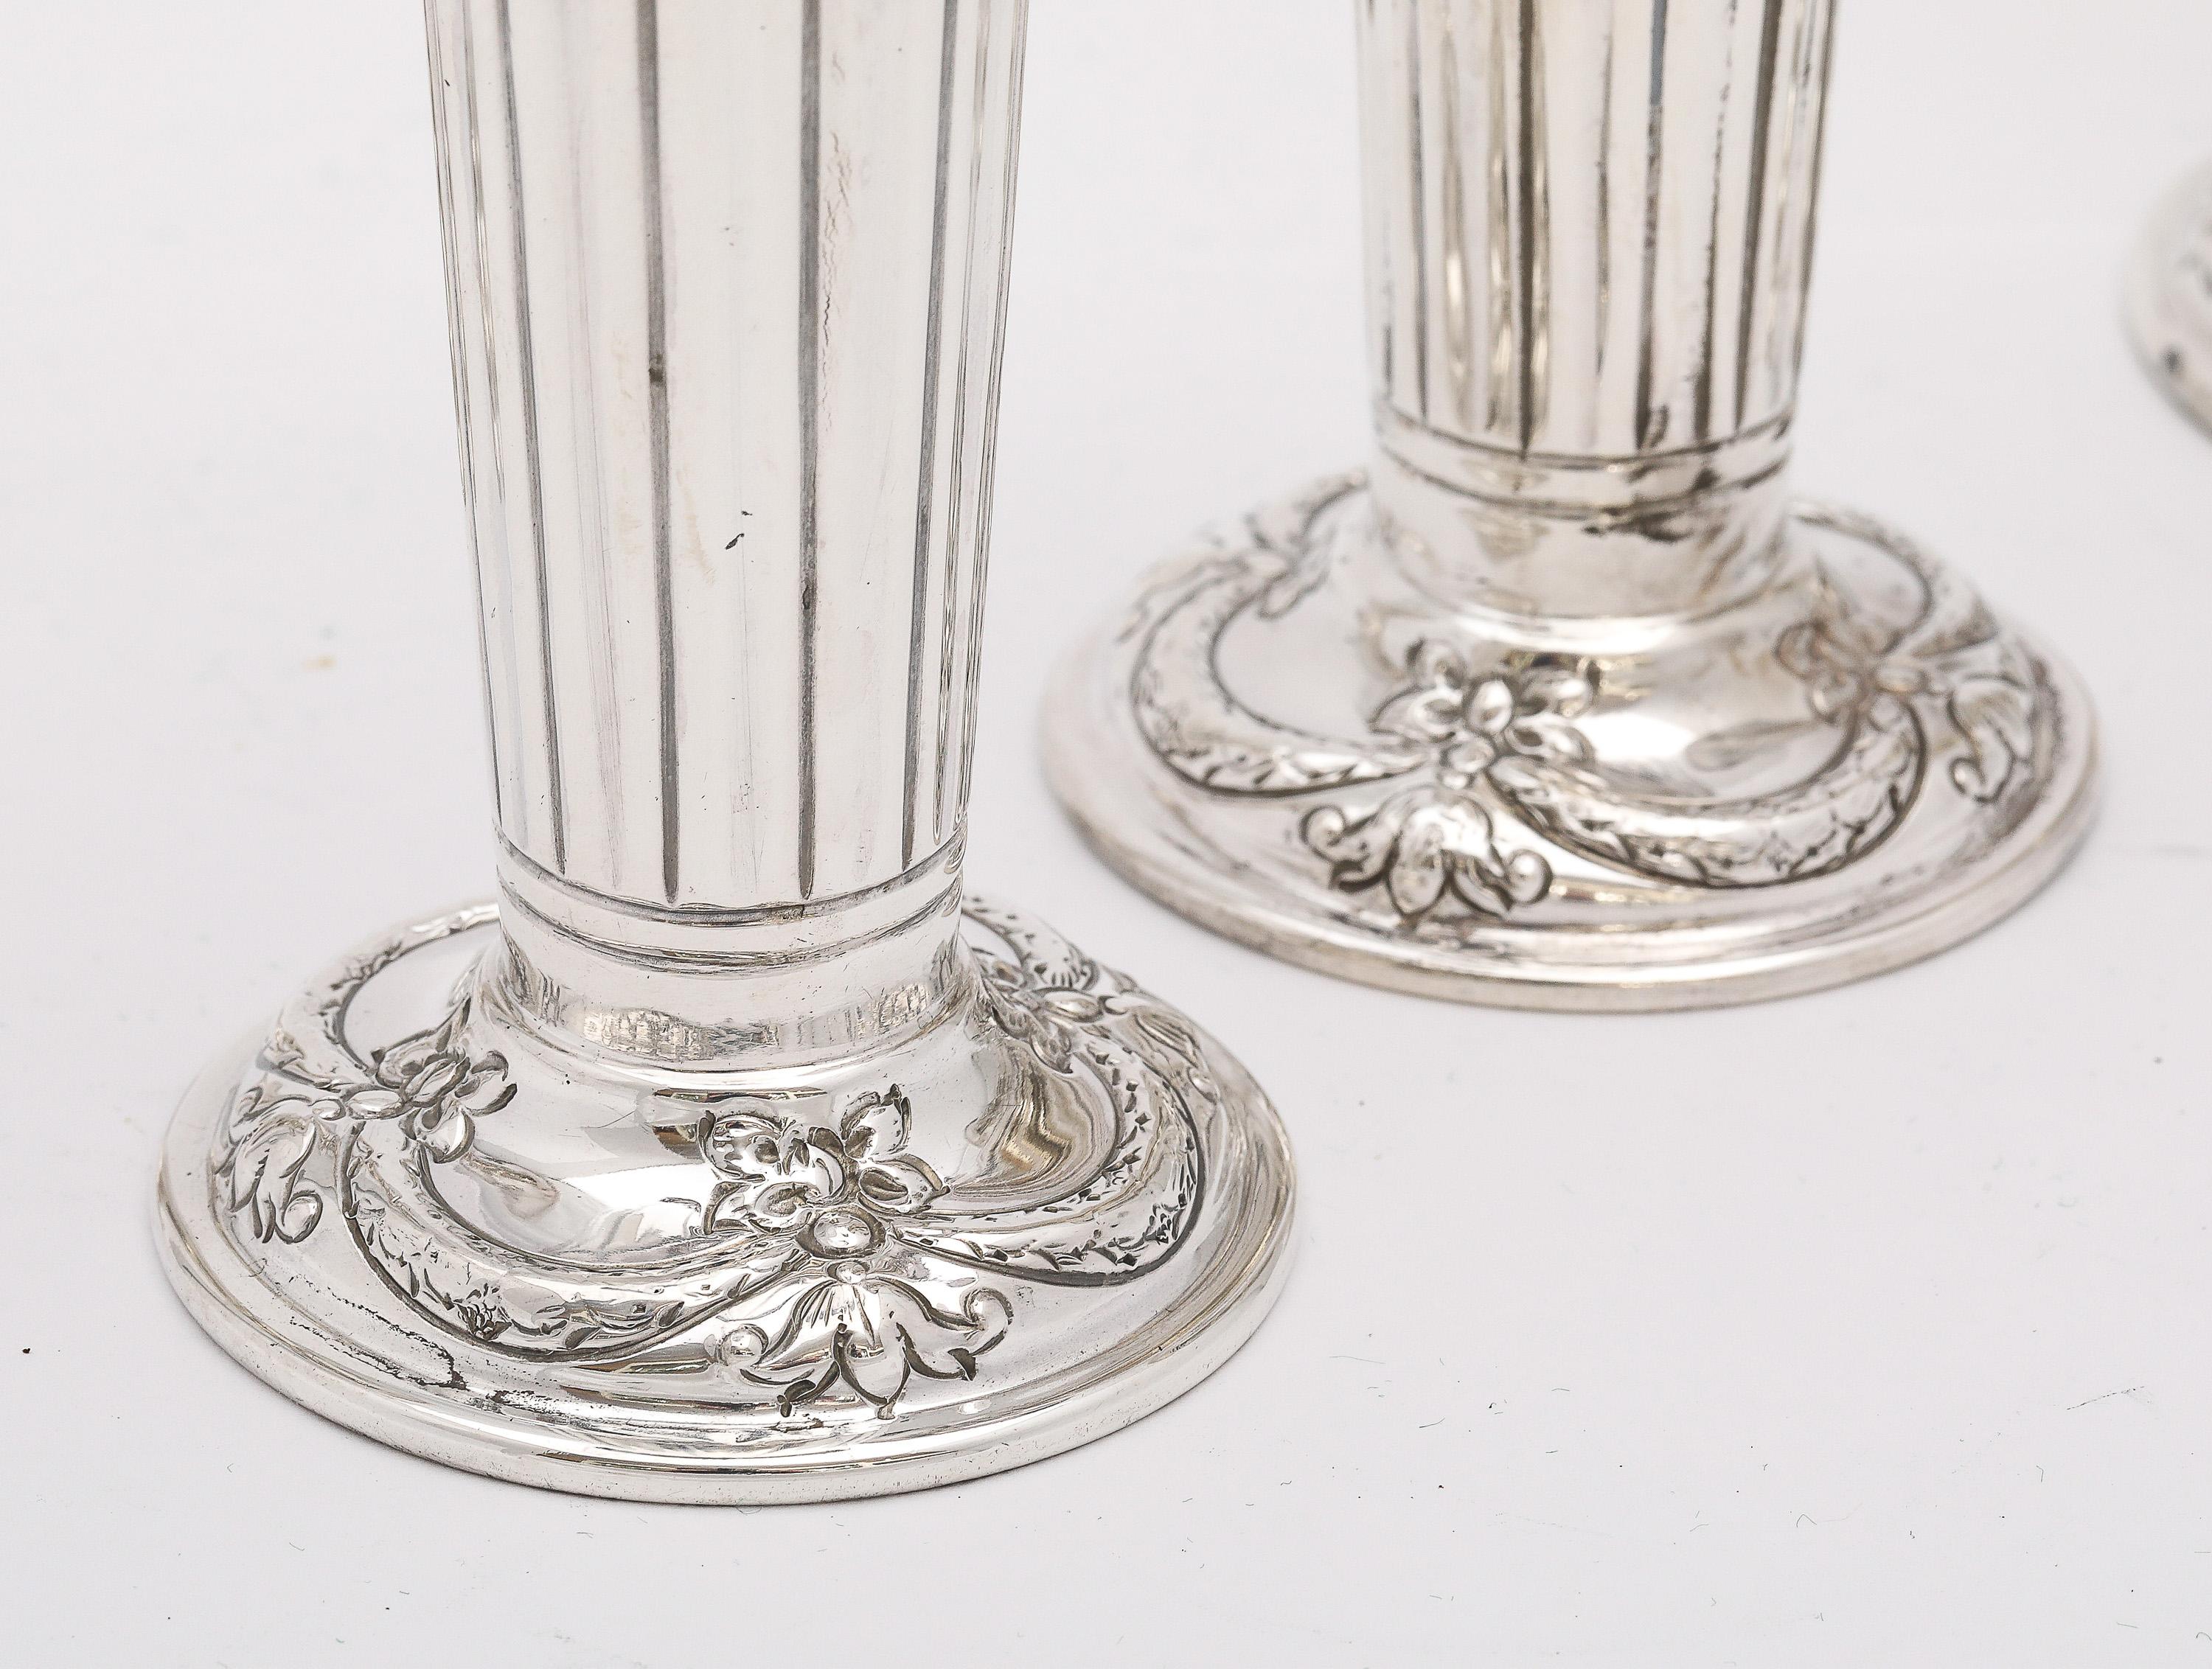 Rare Victorian Period Set of Four Matching Sterling Silver Bud Vases By Atkin For Sale 7